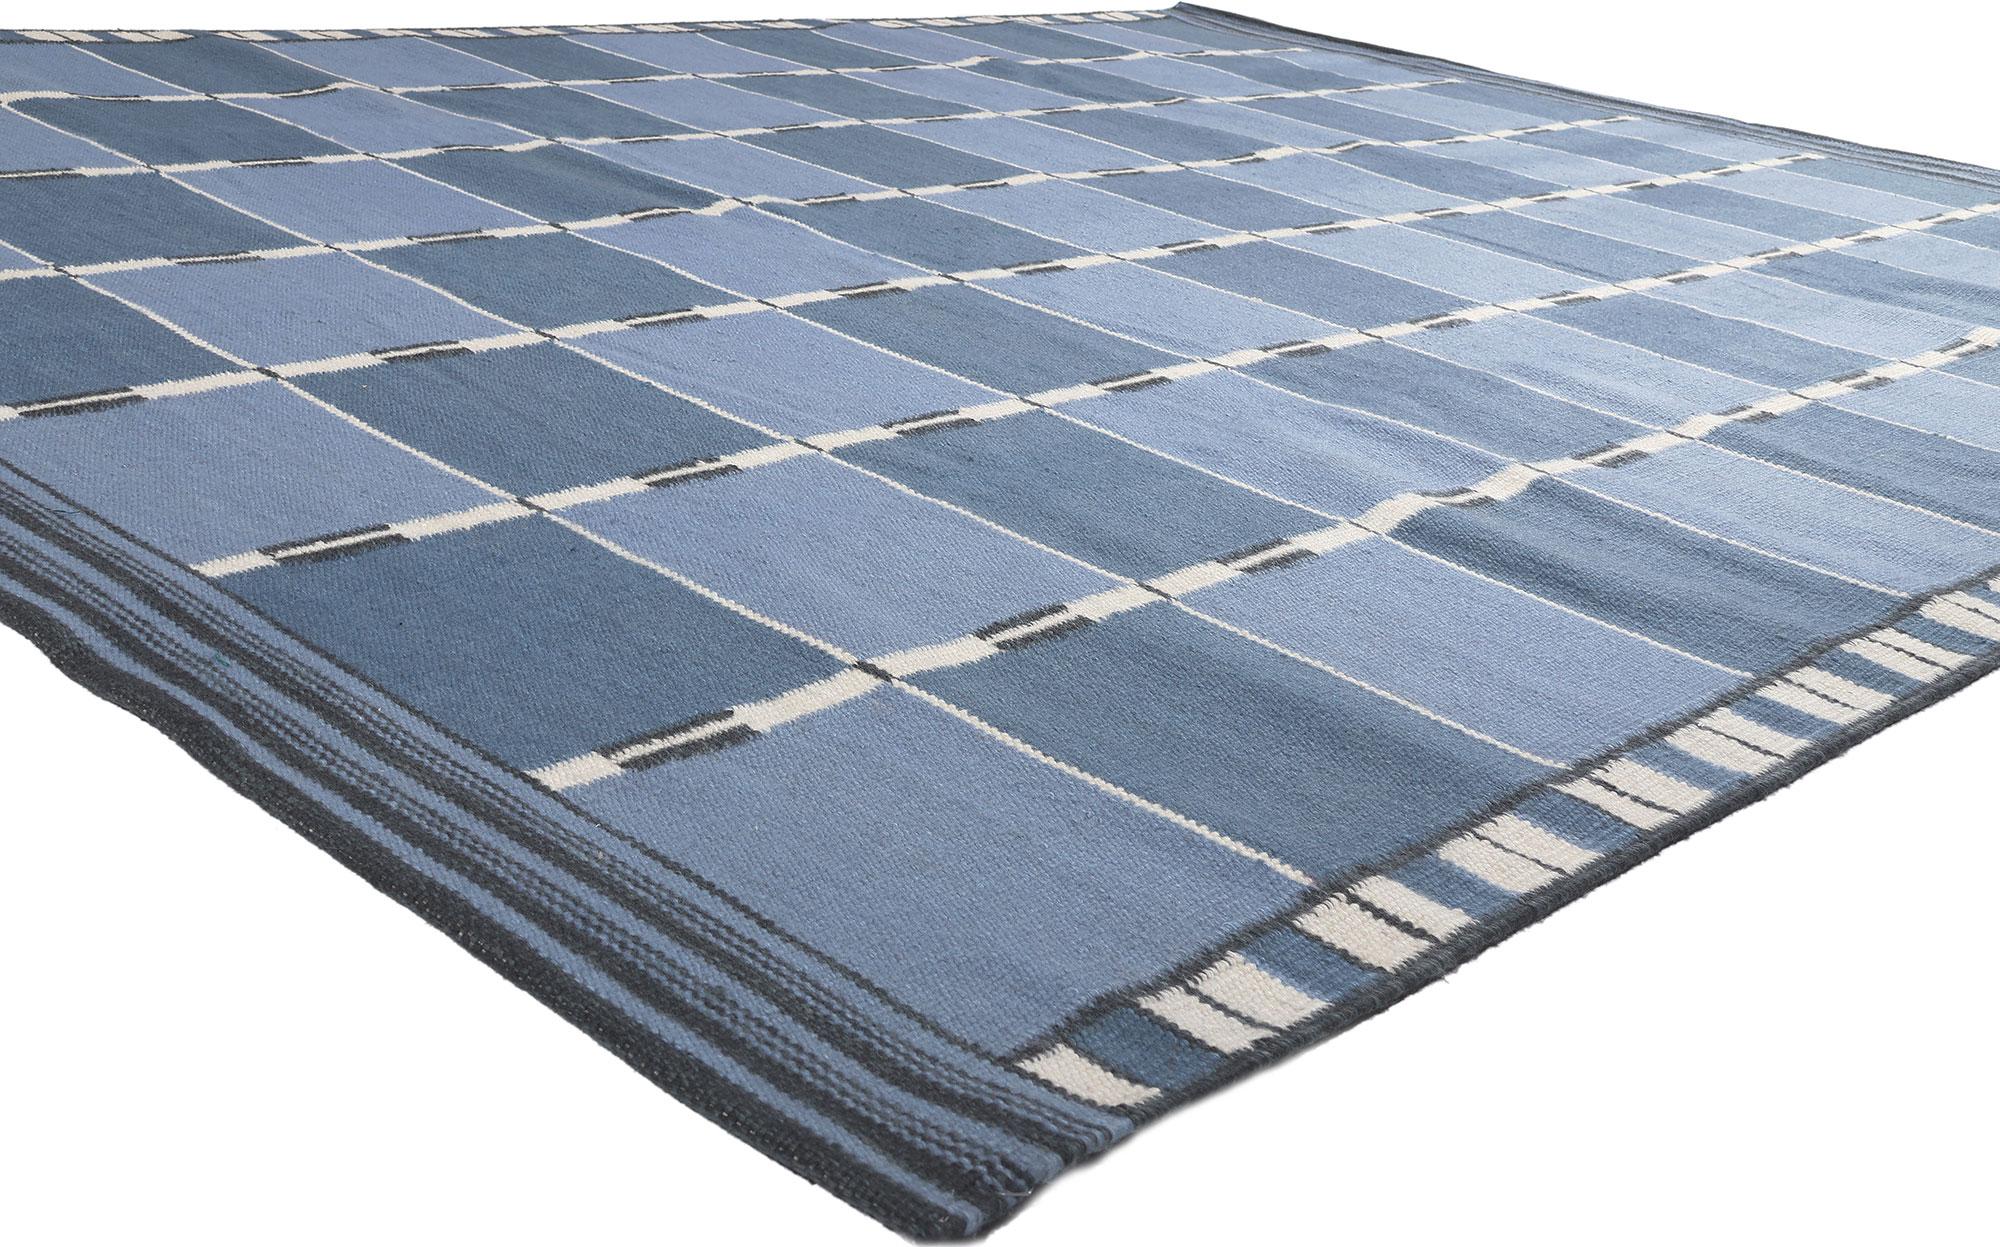 30940 New Swedish Inspired Kilim Rug, 09'03 x 11'11. Displaying simplicity with incredible detail and texture, this handwoven wool Swedish inspired Kilim rug provides a feeling of cozy contentment without the clutter. The eye-catching checked design